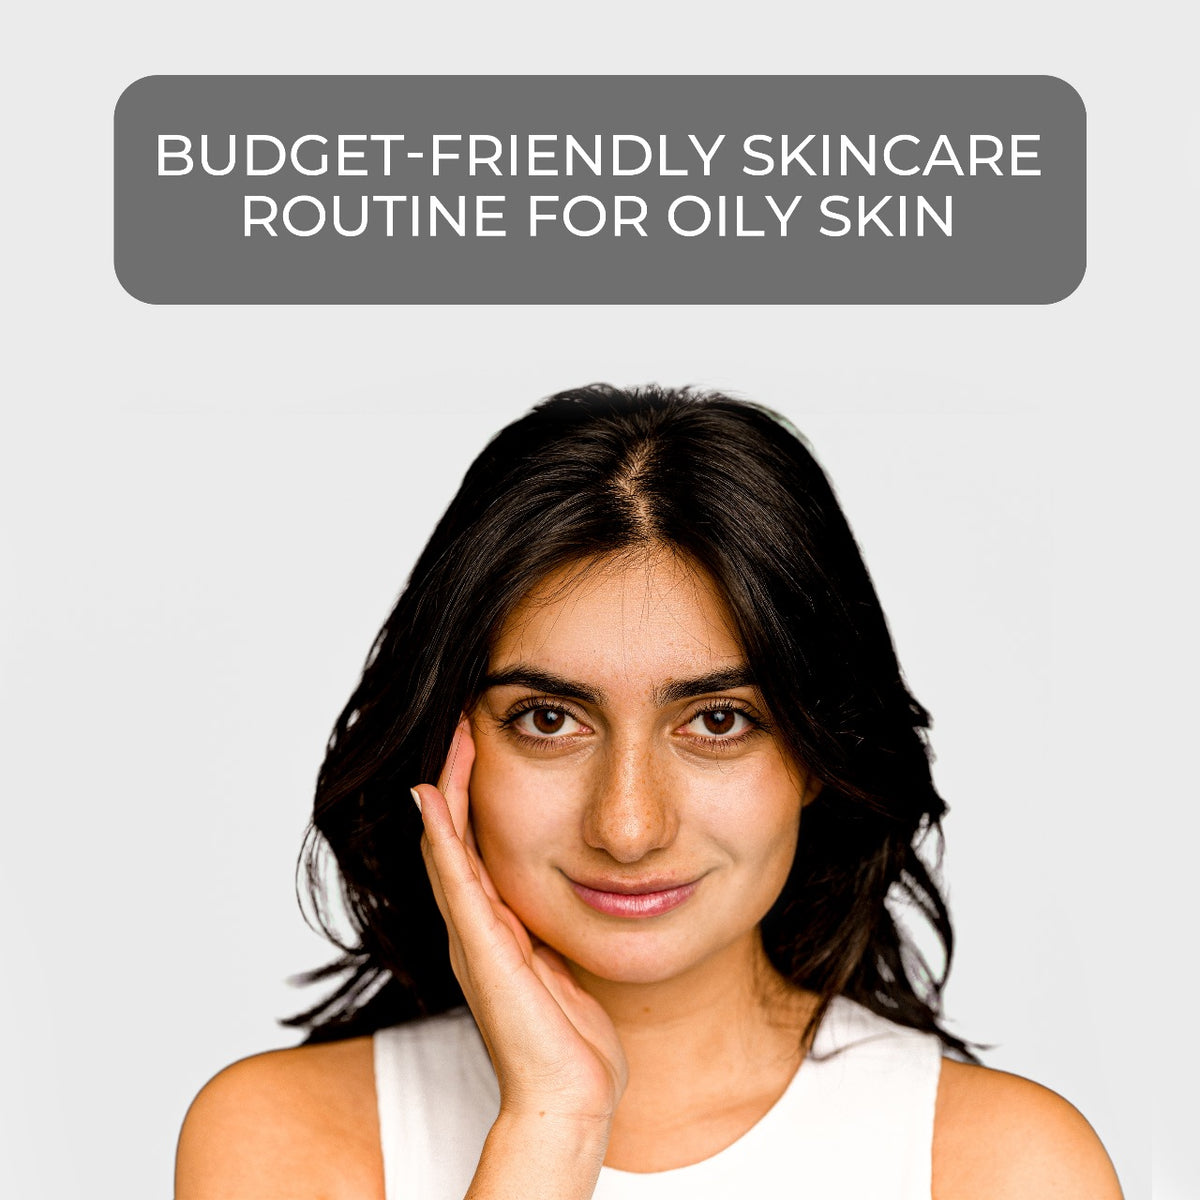 Budget-Friendly Skincare Routine for Oily Skin